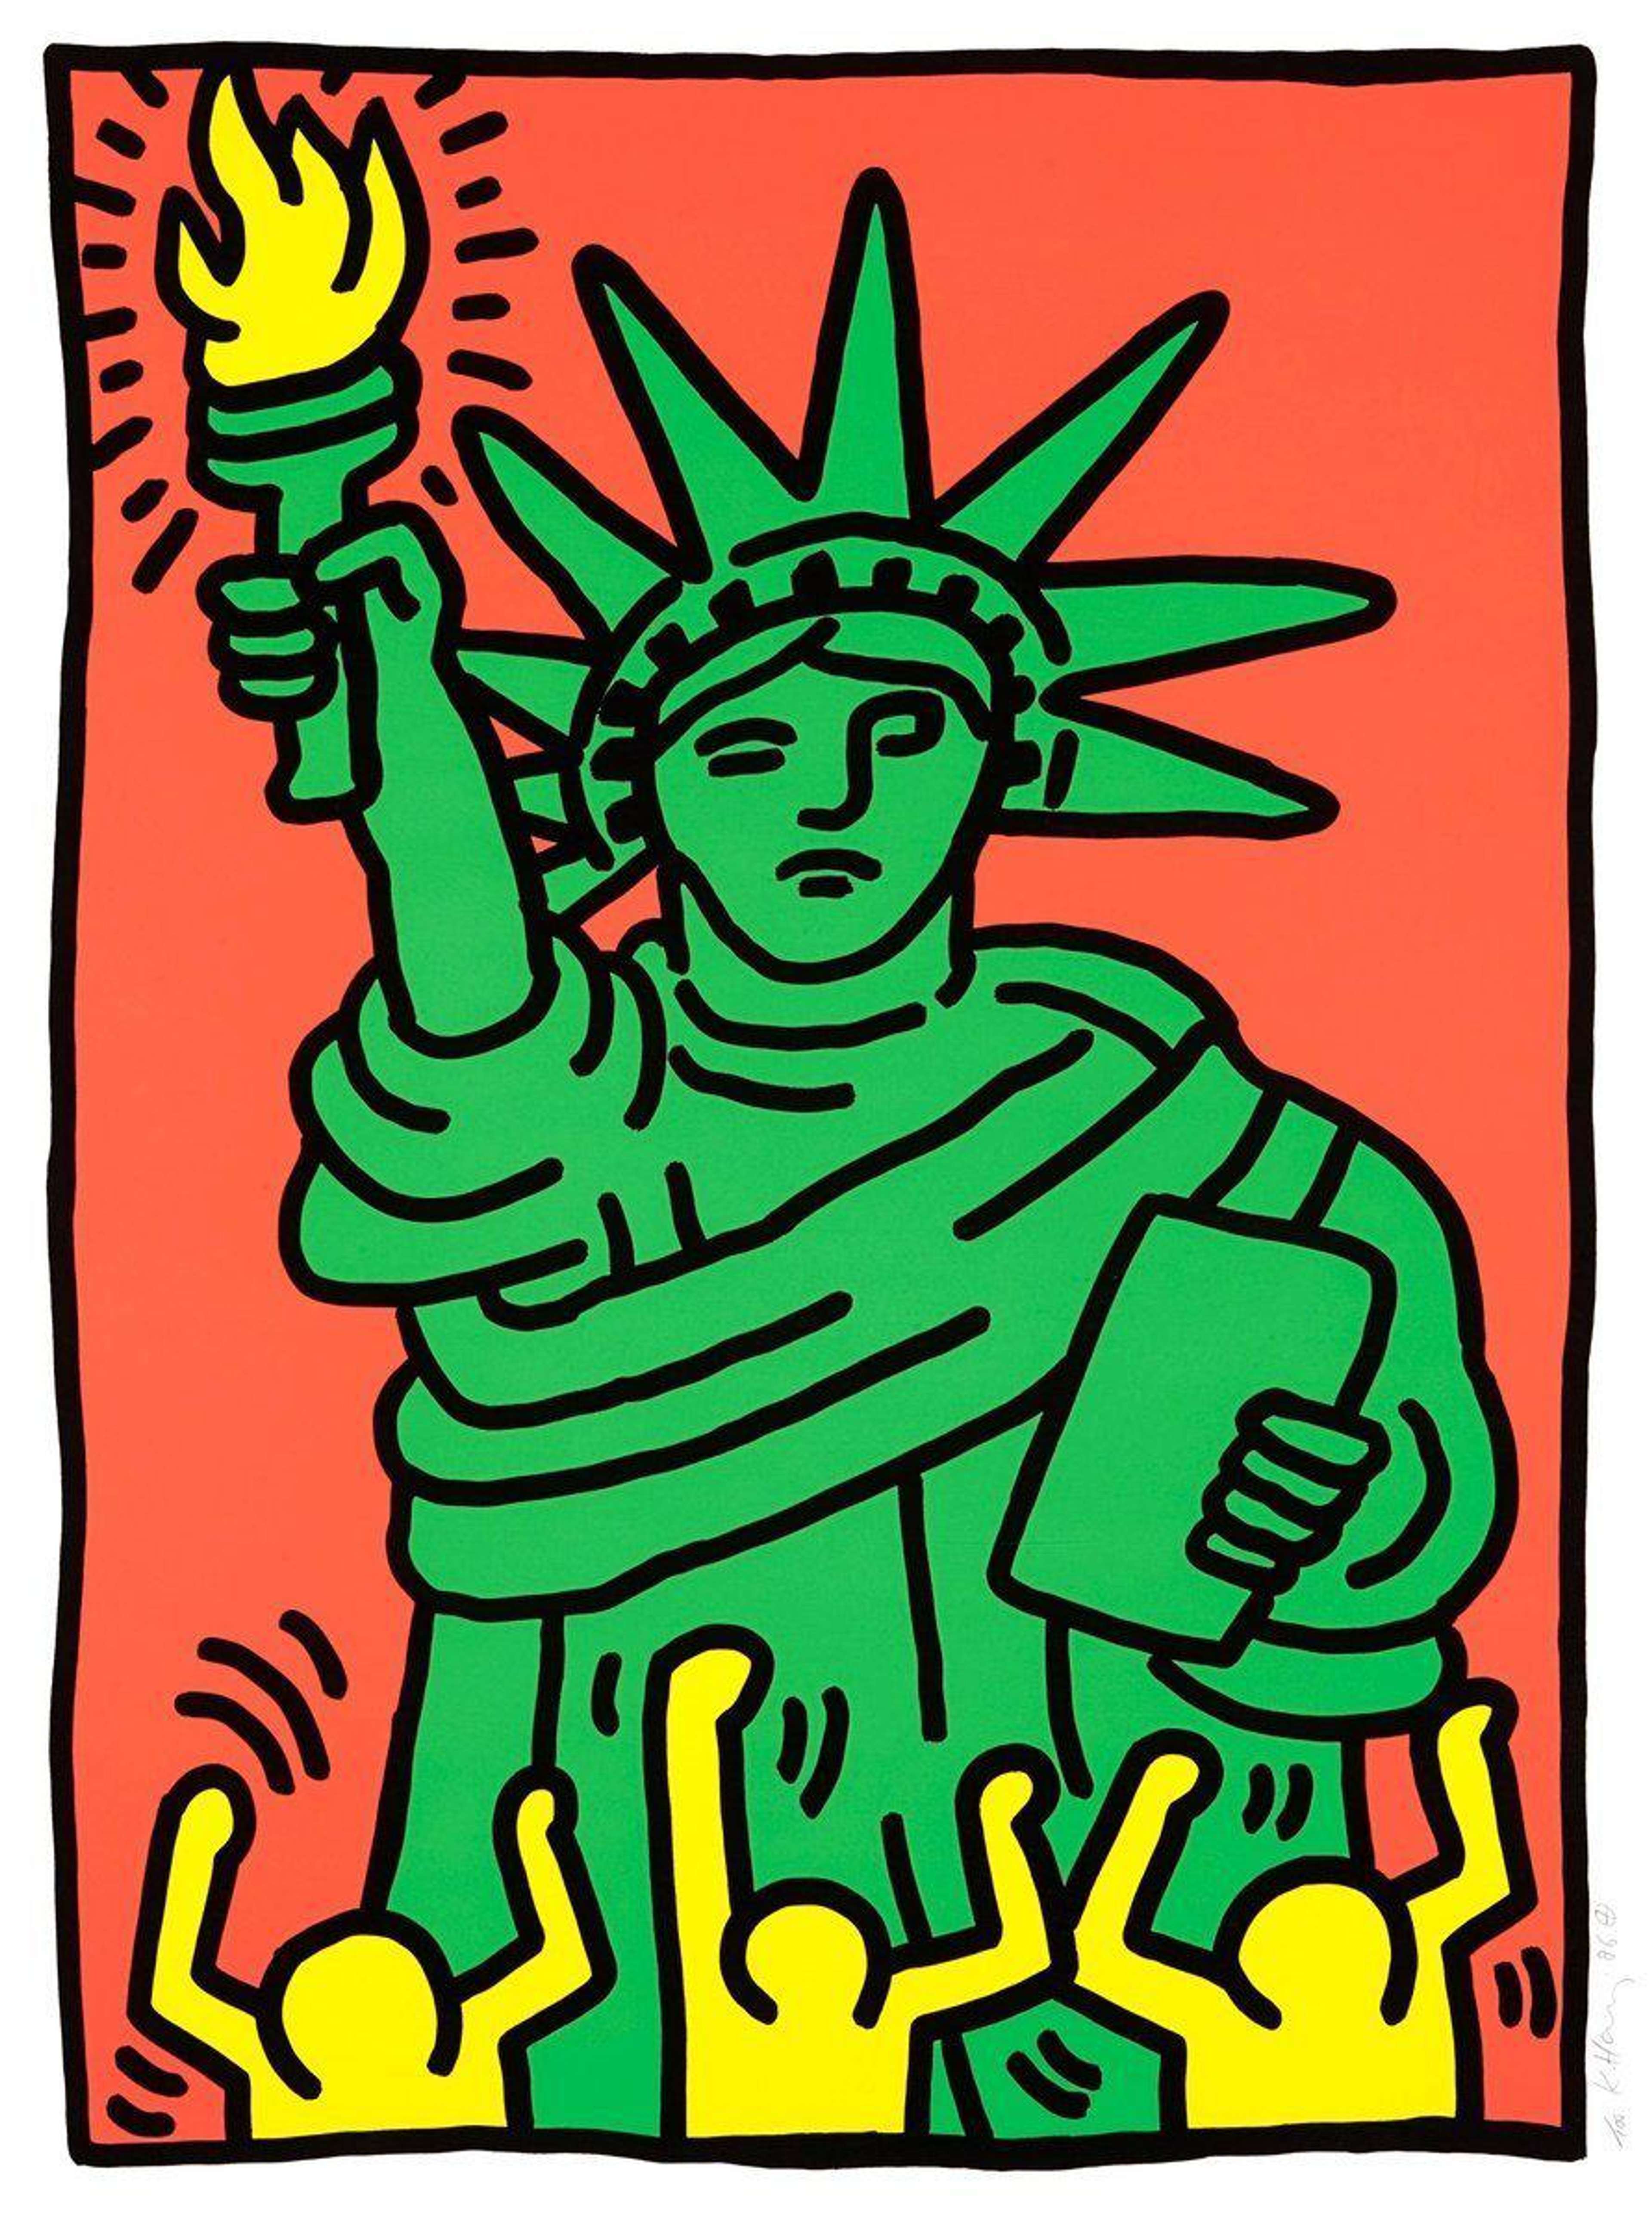 Statue Of Liberty - Signed Print by Keith Haring 1986 - MyArtBroker